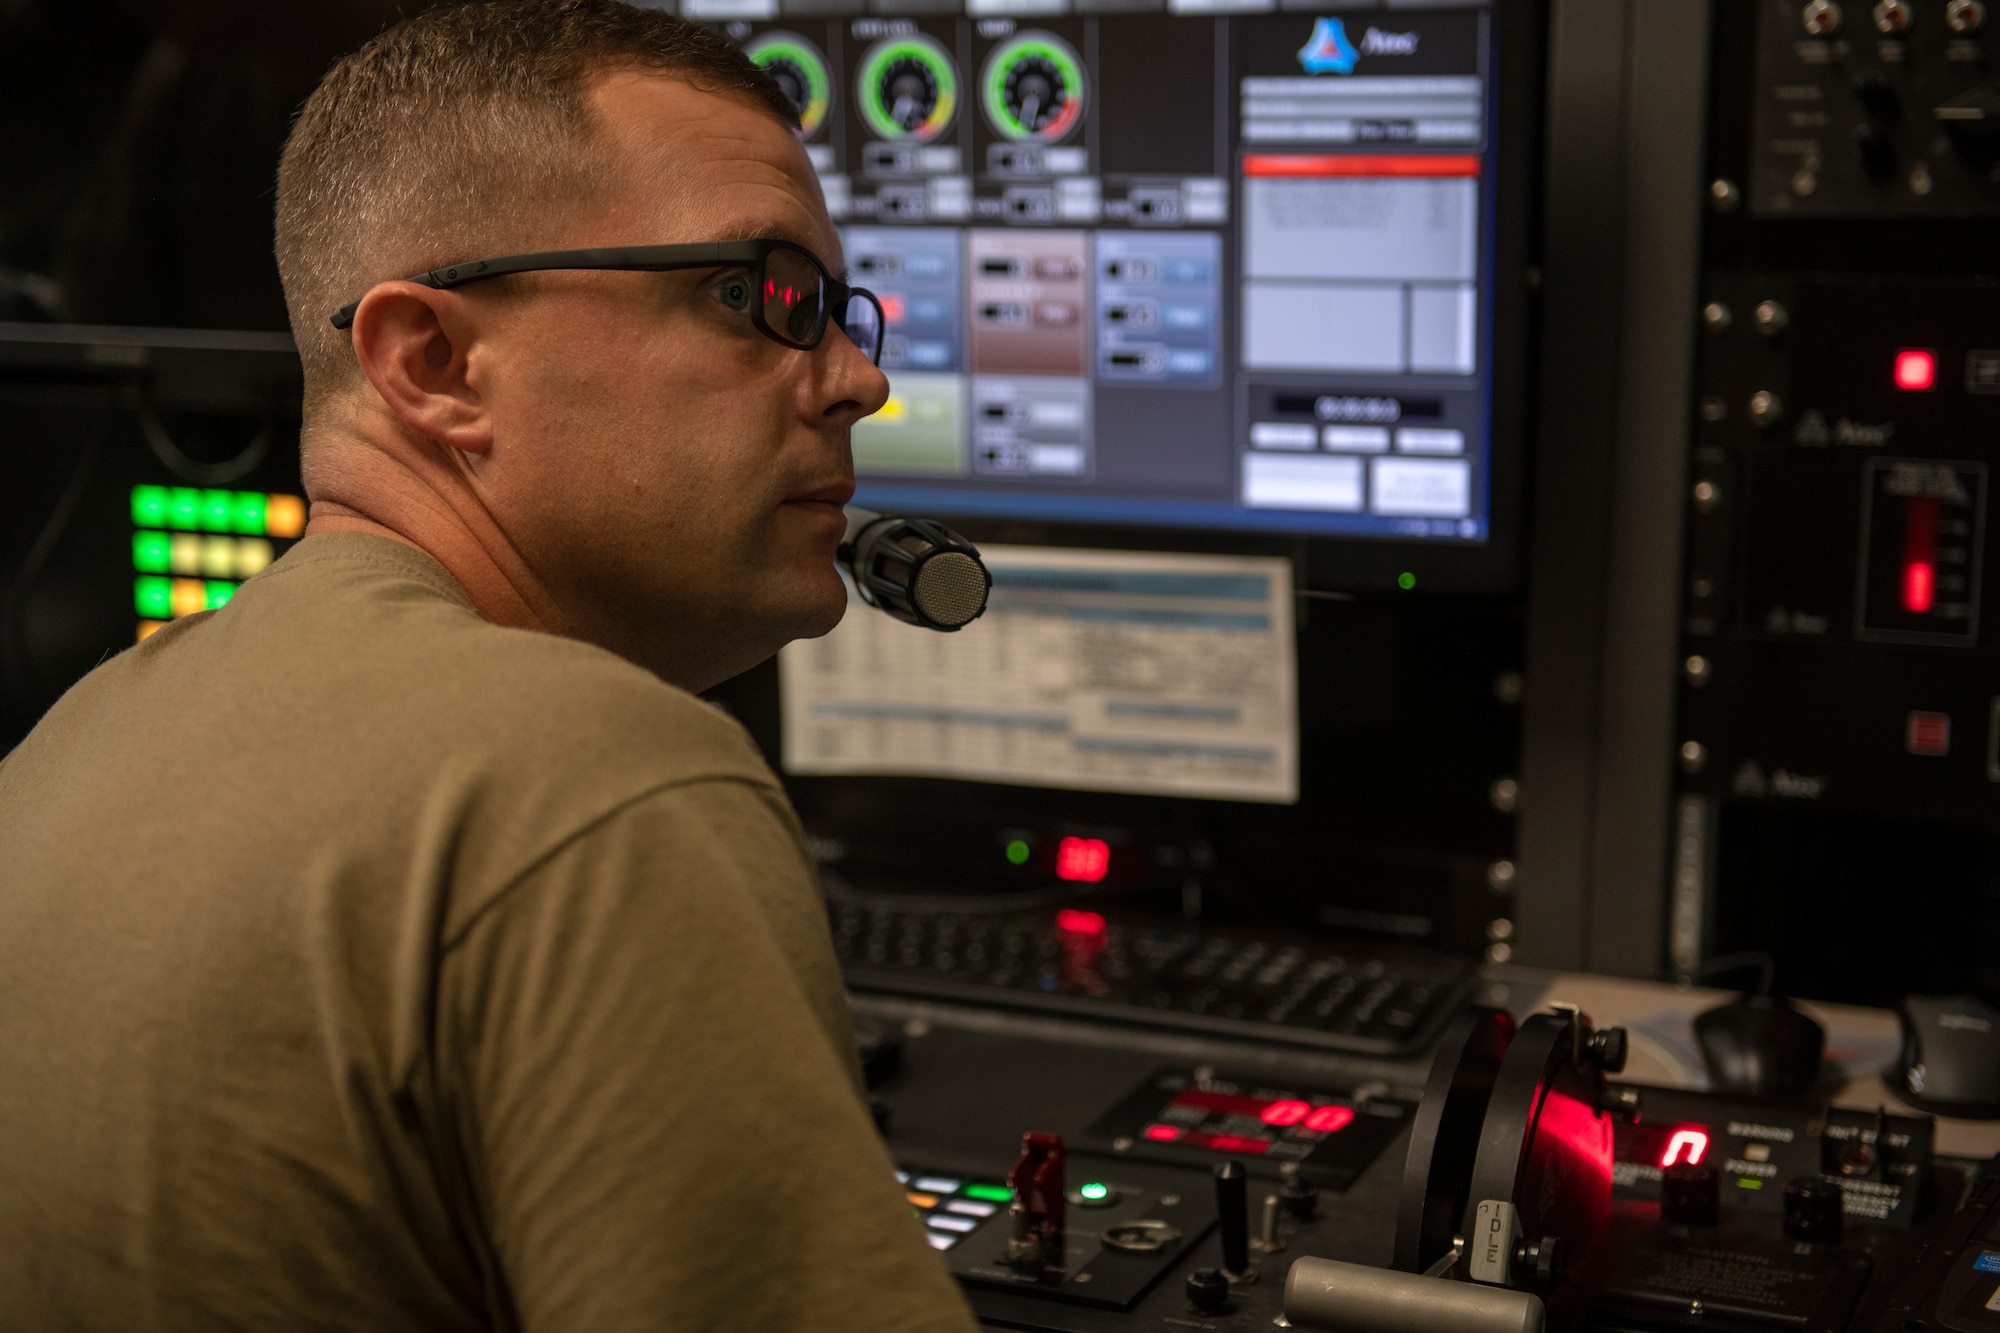 U.S. Air Force Staff Sgt. Dustin Chapman, 18th Component Maintenance Squadron test cell craftsman, maintains visual and verbal communication with the Airman inside the test cell at Kadena Air Base, Japan, Aug. 25, 2022. The control booth operator records all engine parameters during the run. The recorded information is used for troubleshooting future engine runs and keeping track of trending data. (U.S. Air Force photo by Senior Airman Jessi Roth)